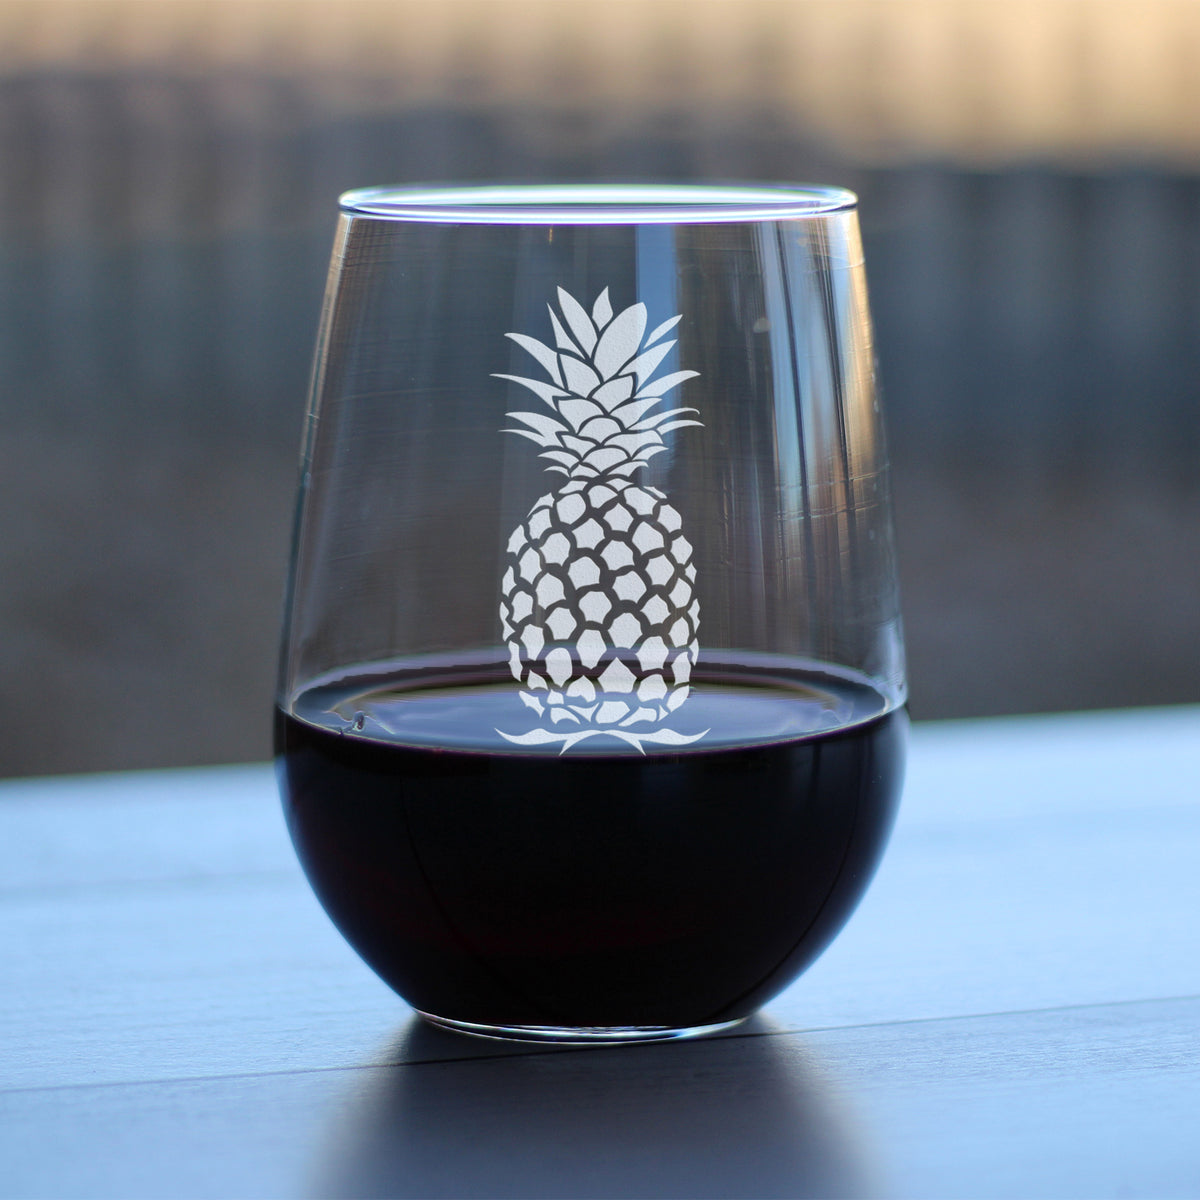 Pineapple Stemless Wine Glass - Cute Tropical Themed Decor and Gifts - Large 17 Oz Glasses